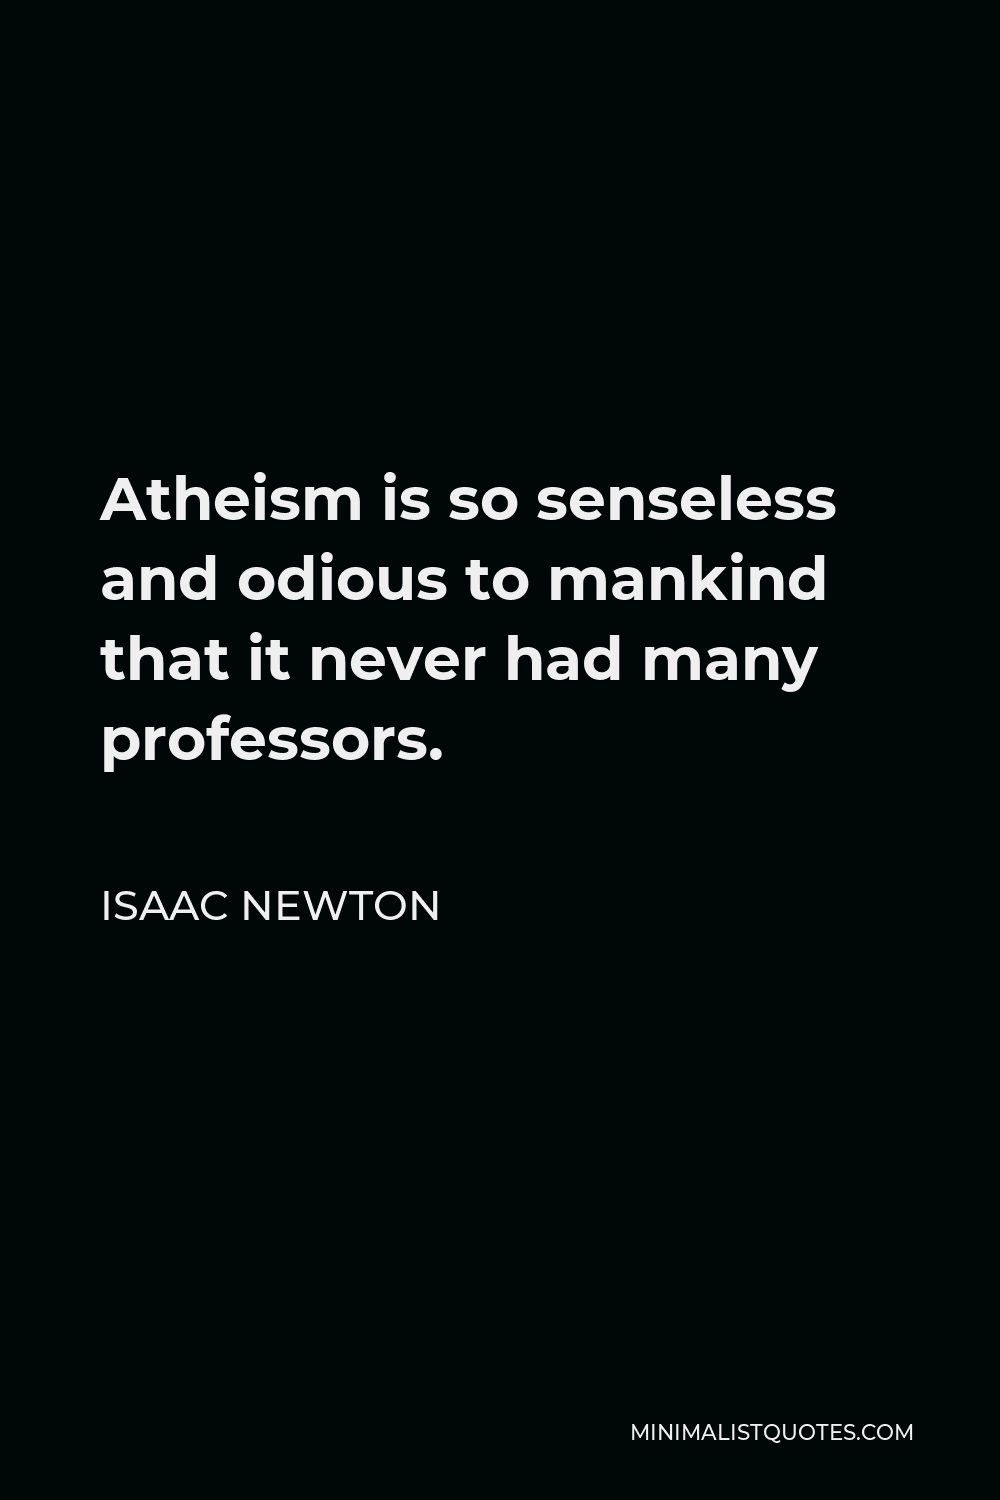 Isaac Newton Quote - Atheism is so senseless and odious to mankind that it never had many professors.